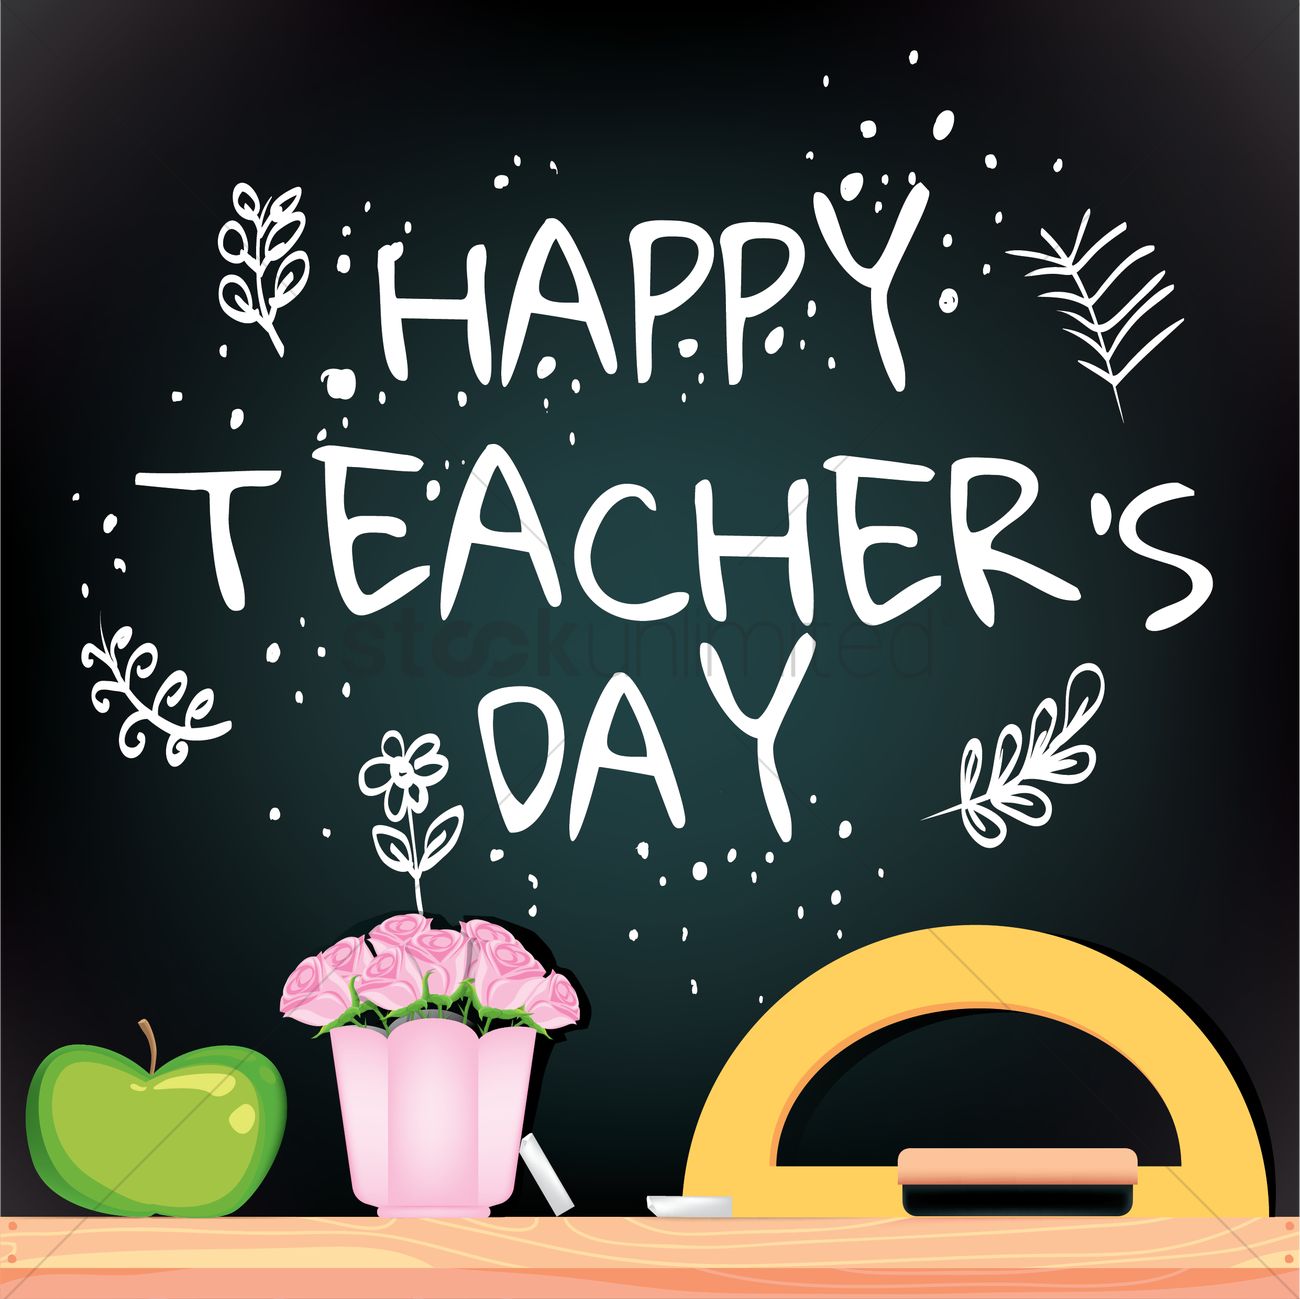 Happy Teachers Day Quotes and Image with Sayings 2021